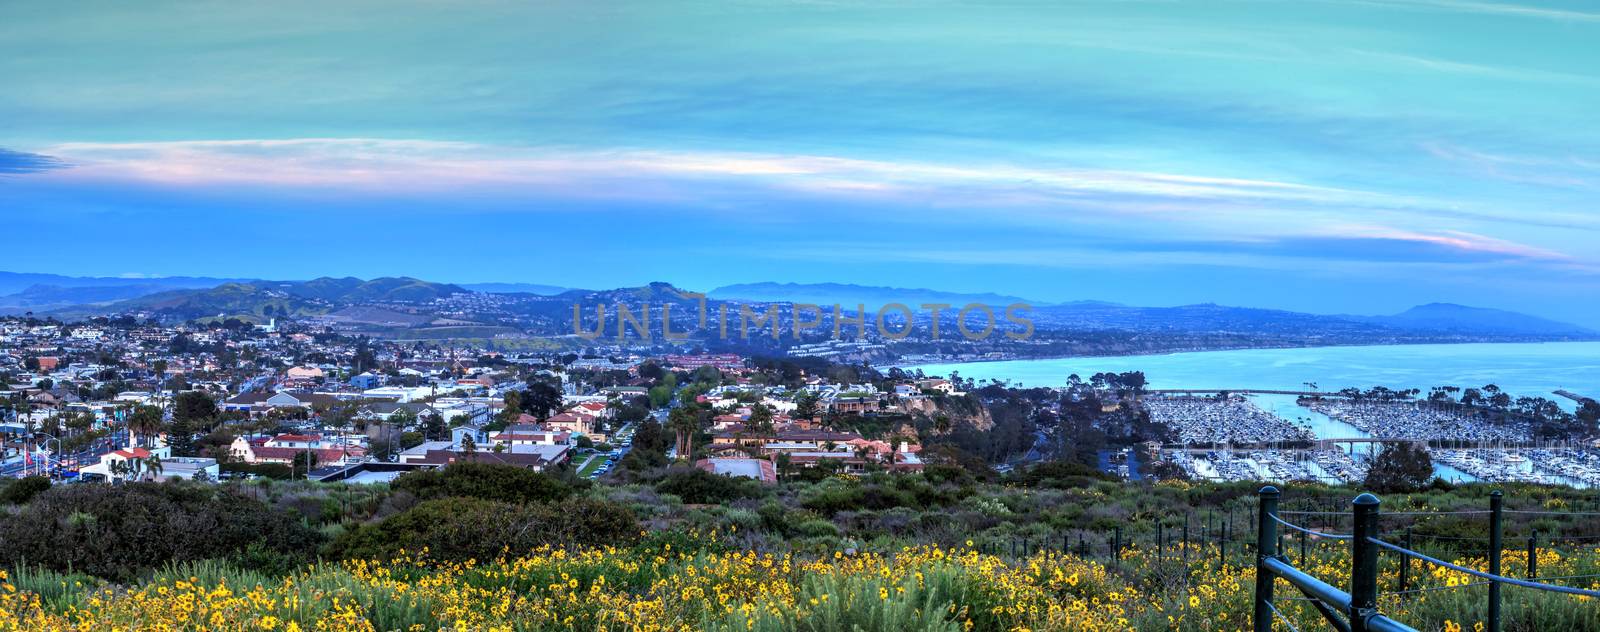 Hiking trail above Dana Point harbor at sunset by steffstarr